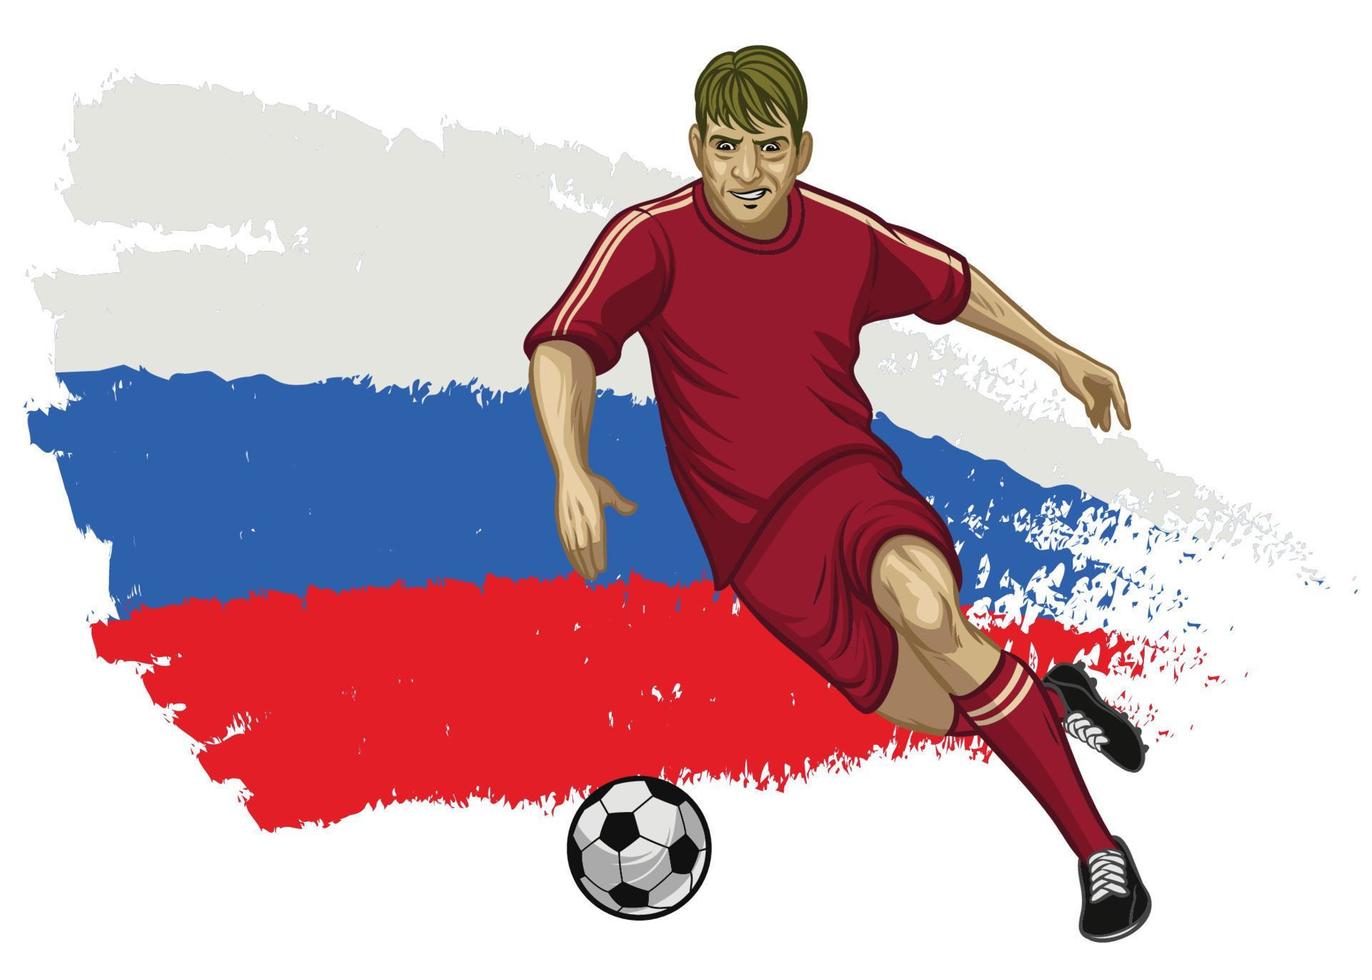 Russia soccer player with flag a s a background vector